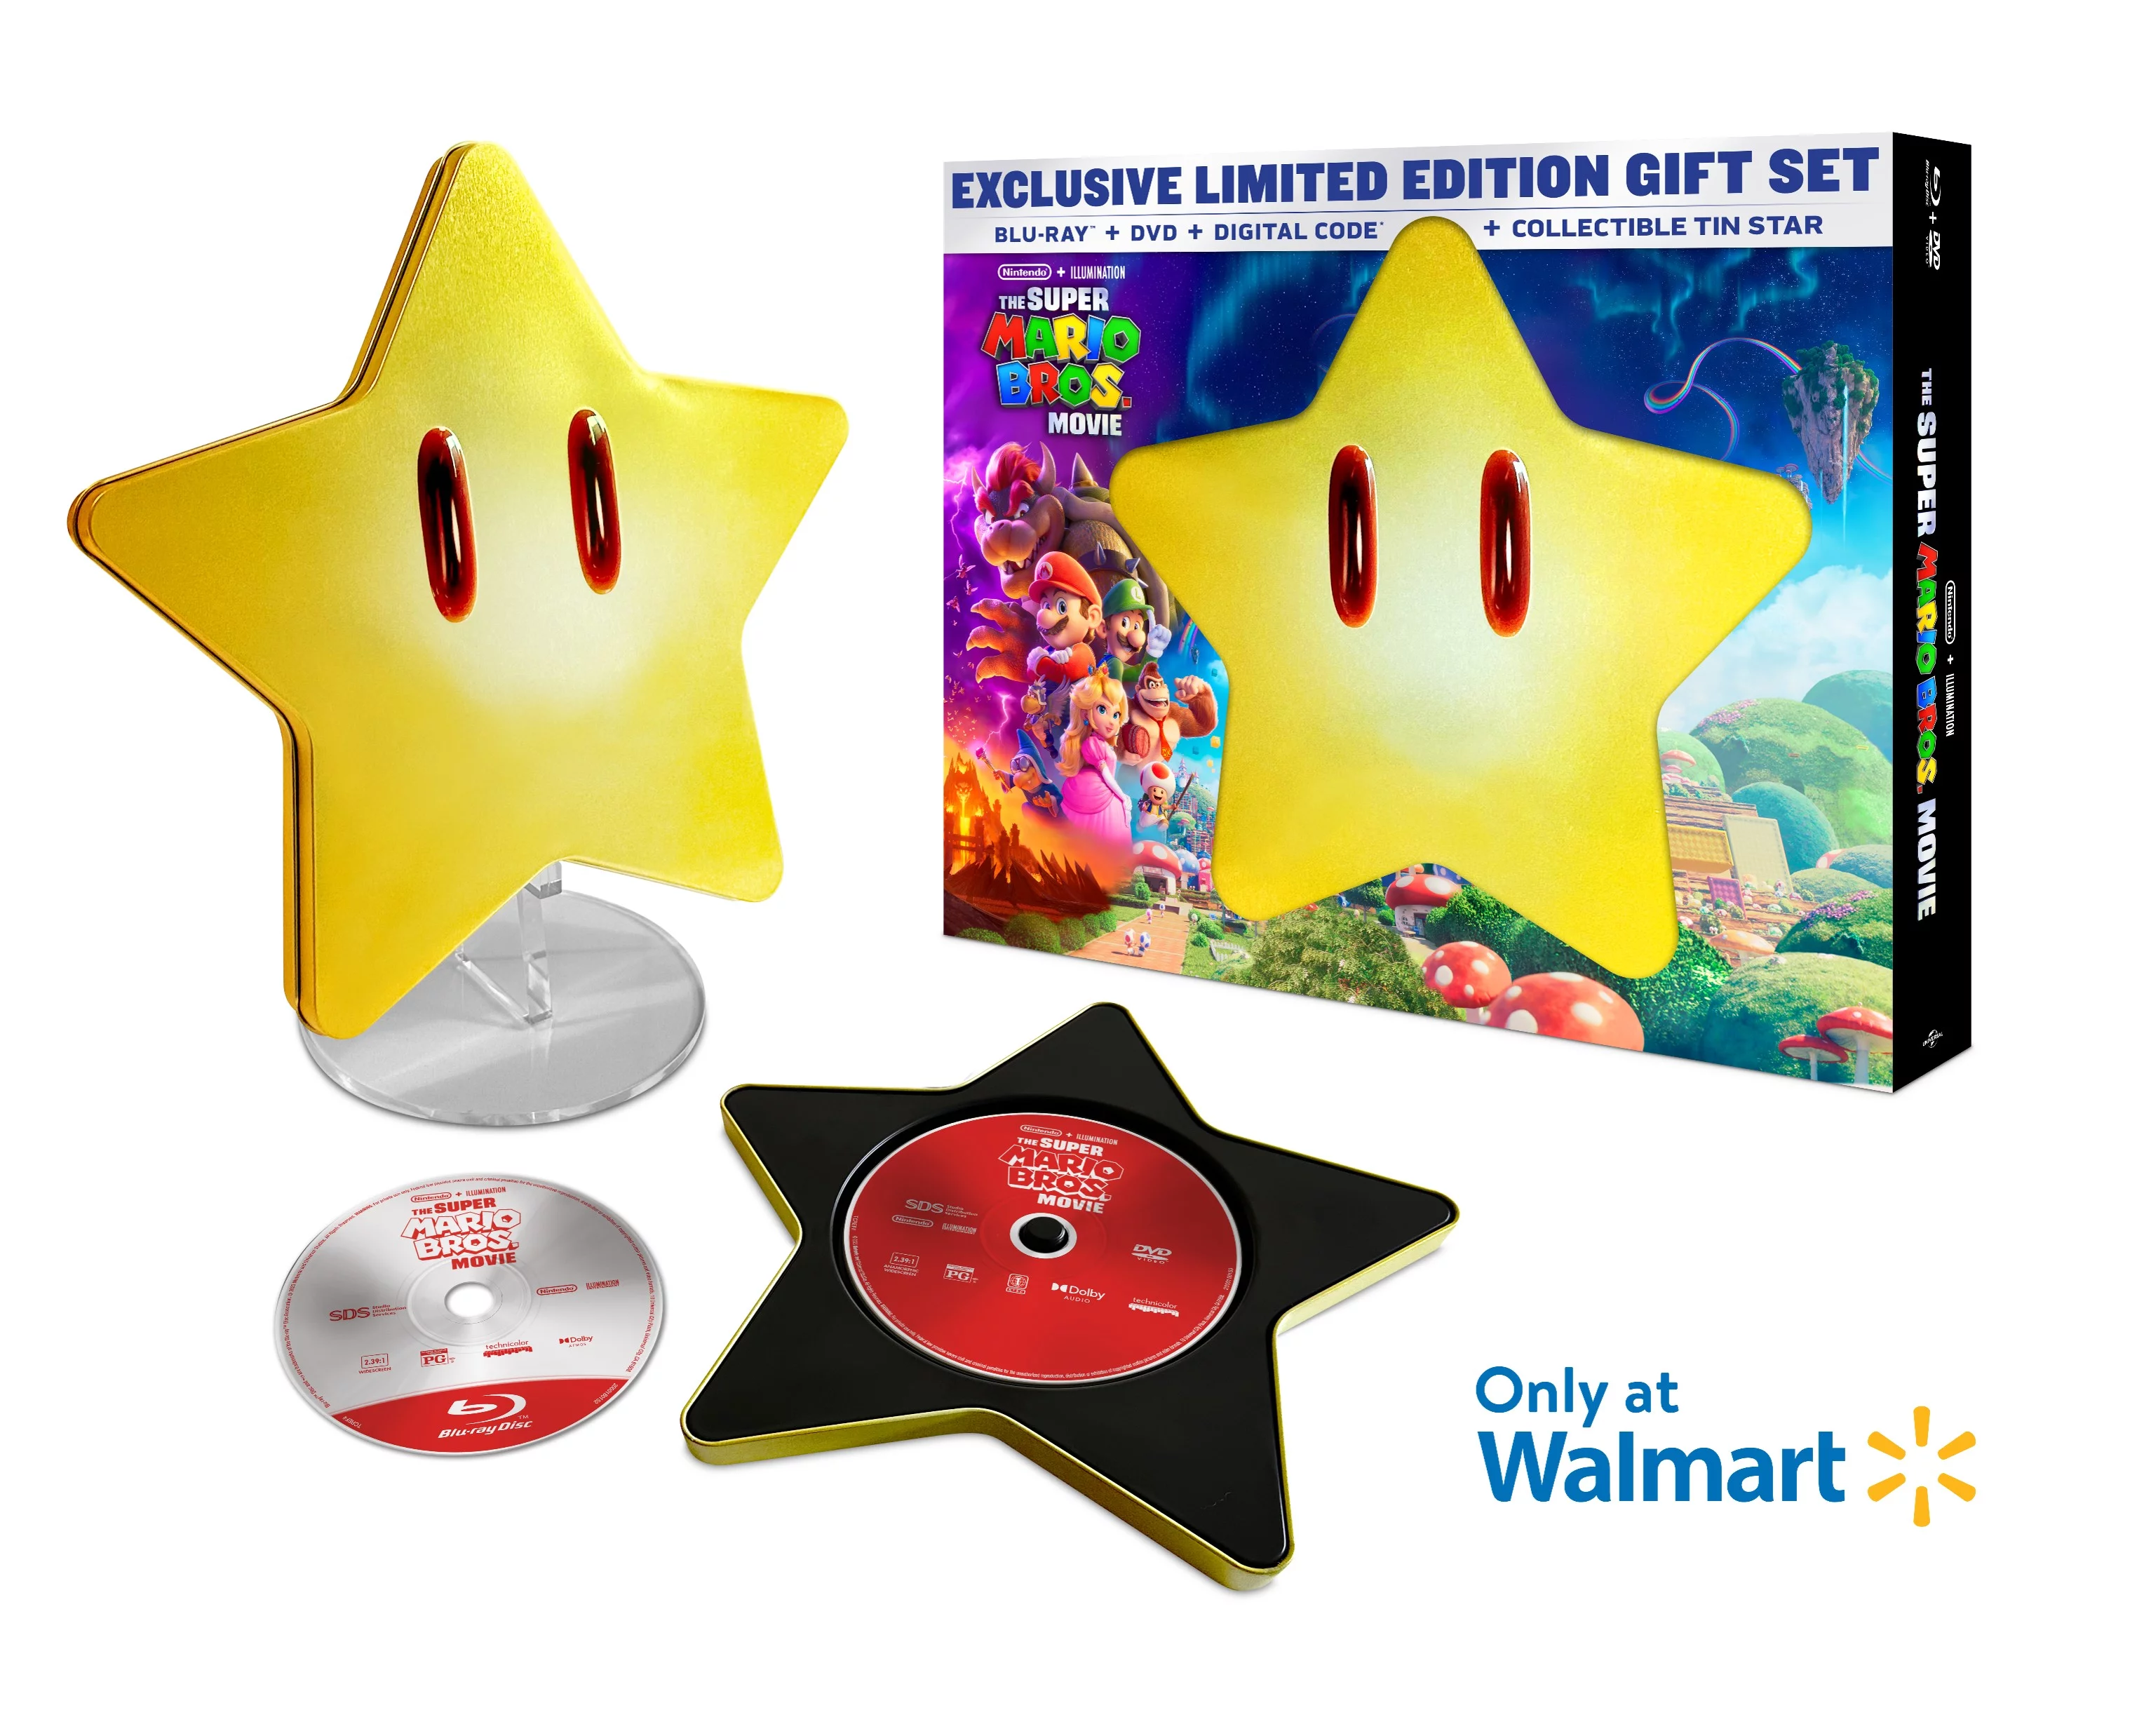 The Super Mario Bros. Movie Limited Edition Giftset with Collectible Tin Star (Walmart Exclusive) (Blu-ray   DVD   Digital Copy)